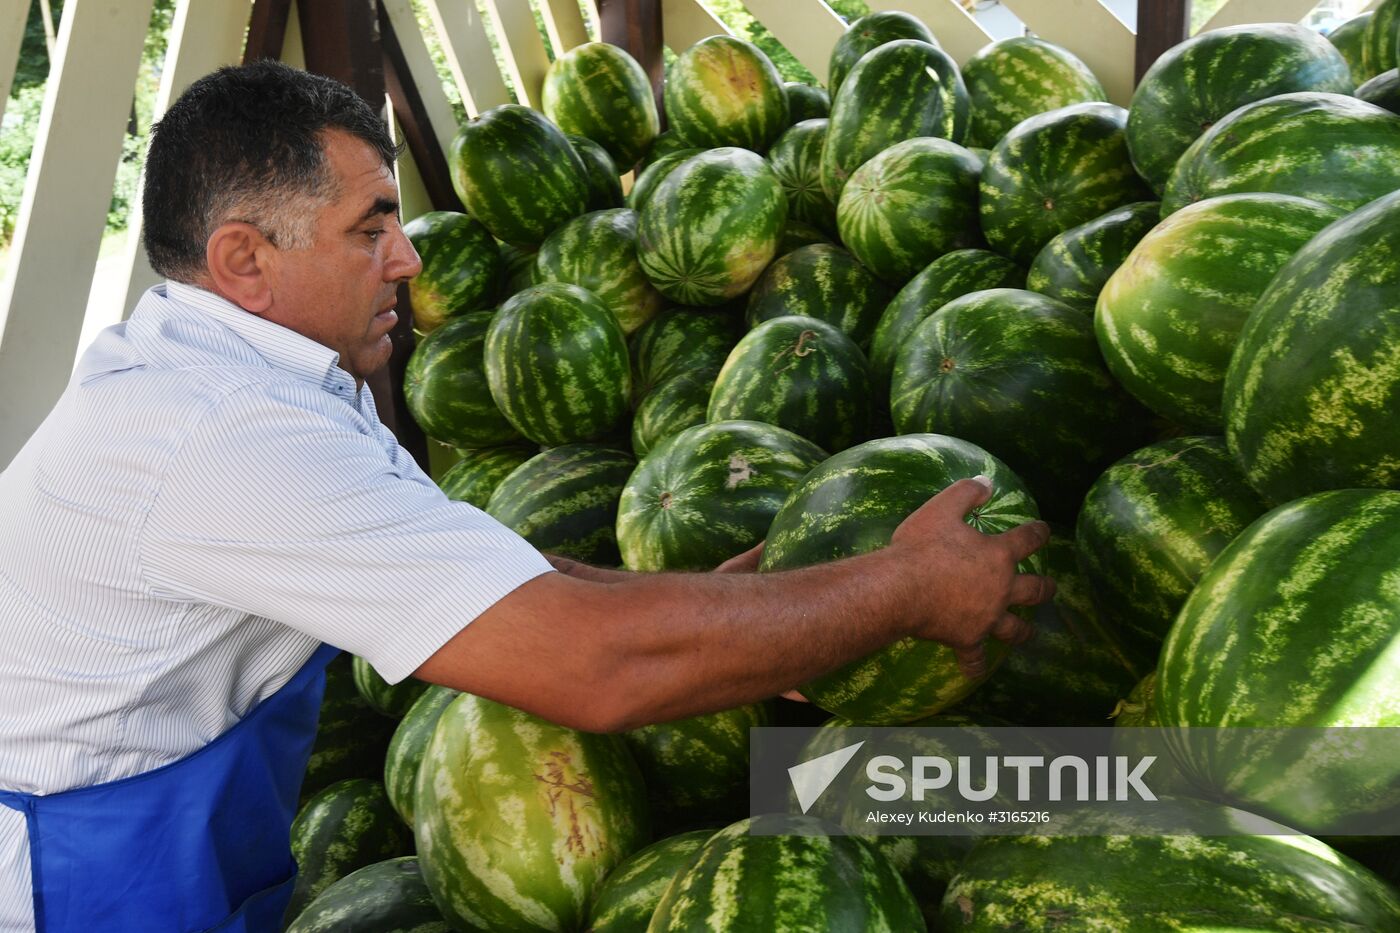 Watermelon sale in Moscow